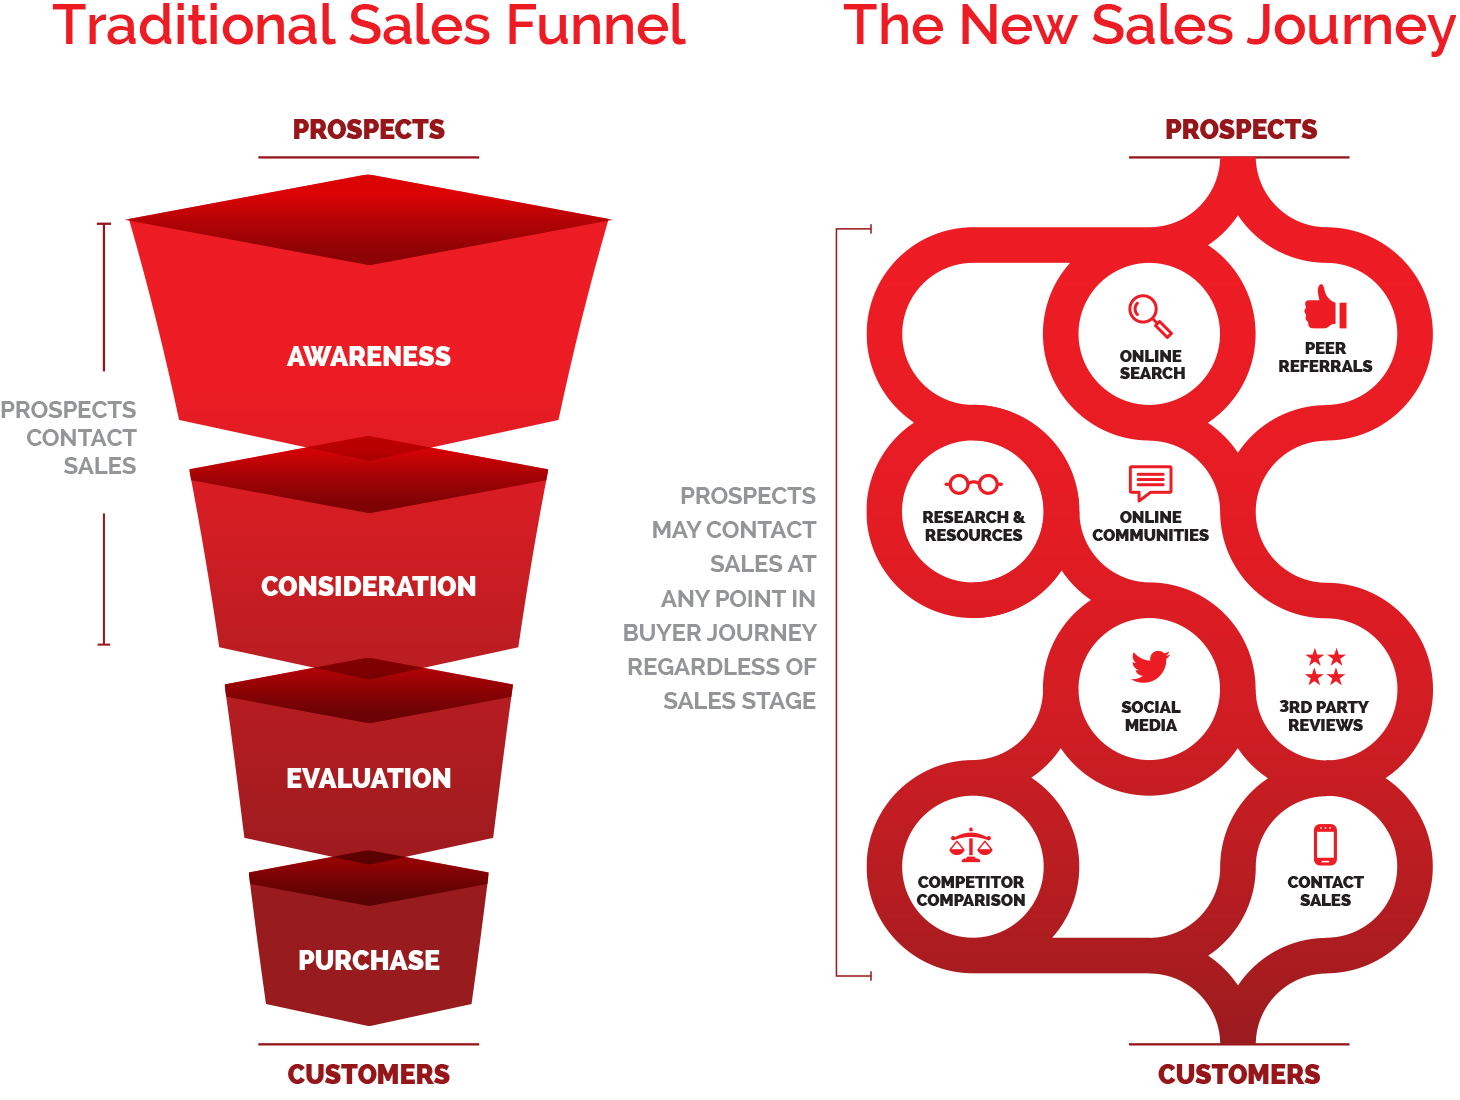 Death of the Sales Funnel